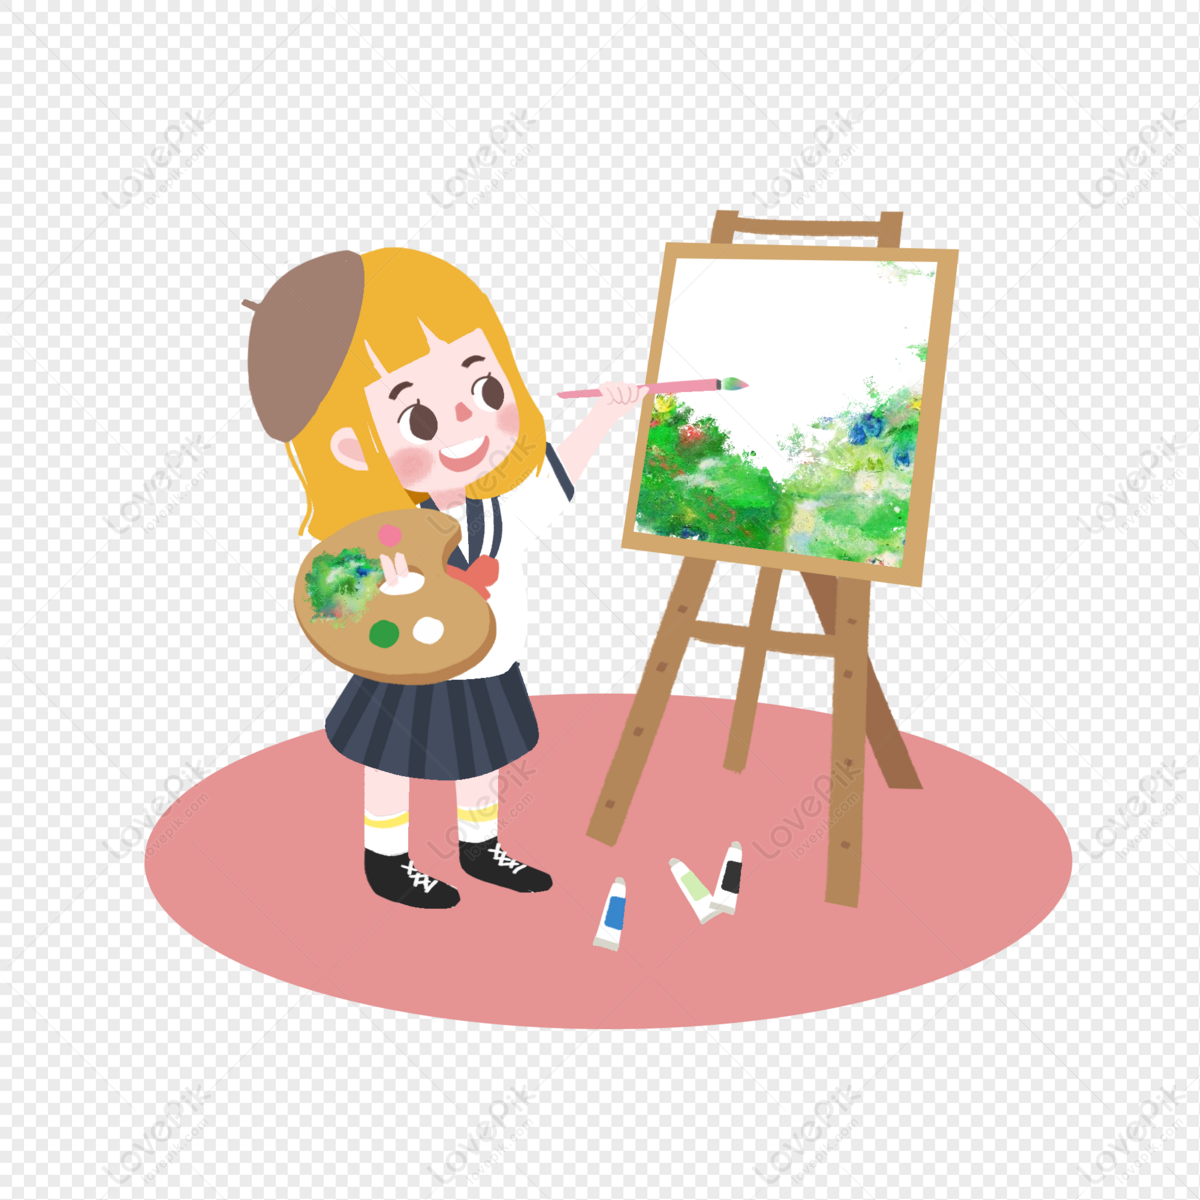 Girl Painting Free PNG And Clipart Image For Free Download - Lovepik |  401480949